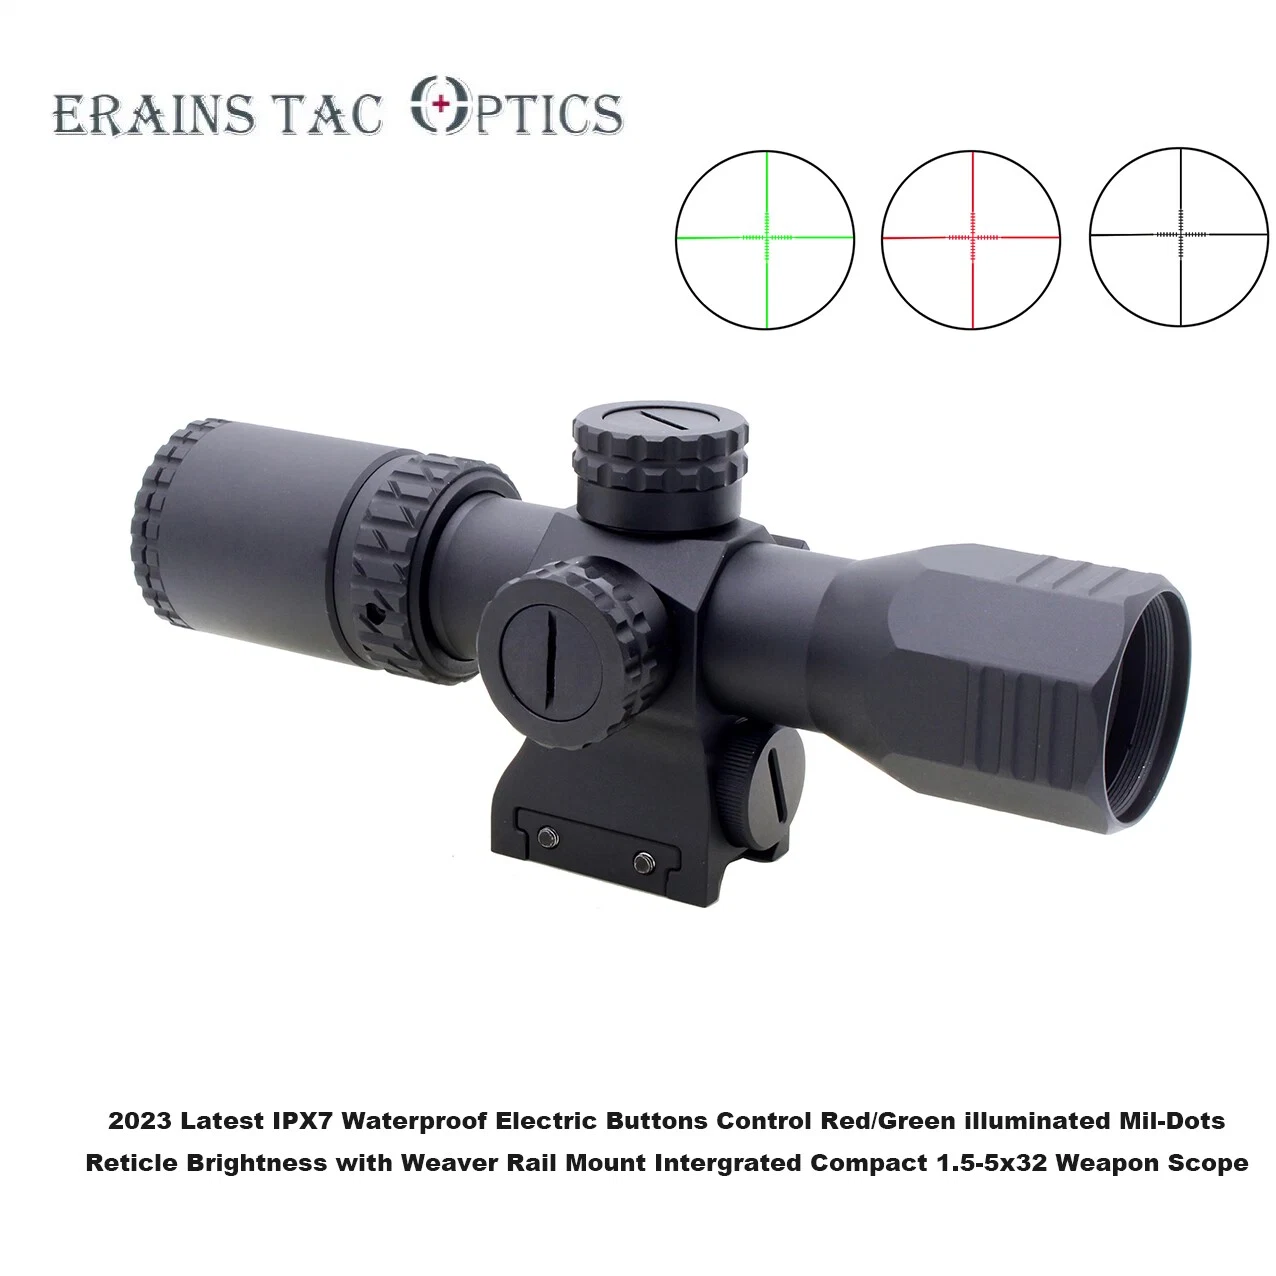 2023 Latest Advanced Ipx7 Rated Electric Buttons Control Red and Green Illumination Mil-Dots Reticle Compact Hunting 1.5-5X32 Tactical Weapon Scope